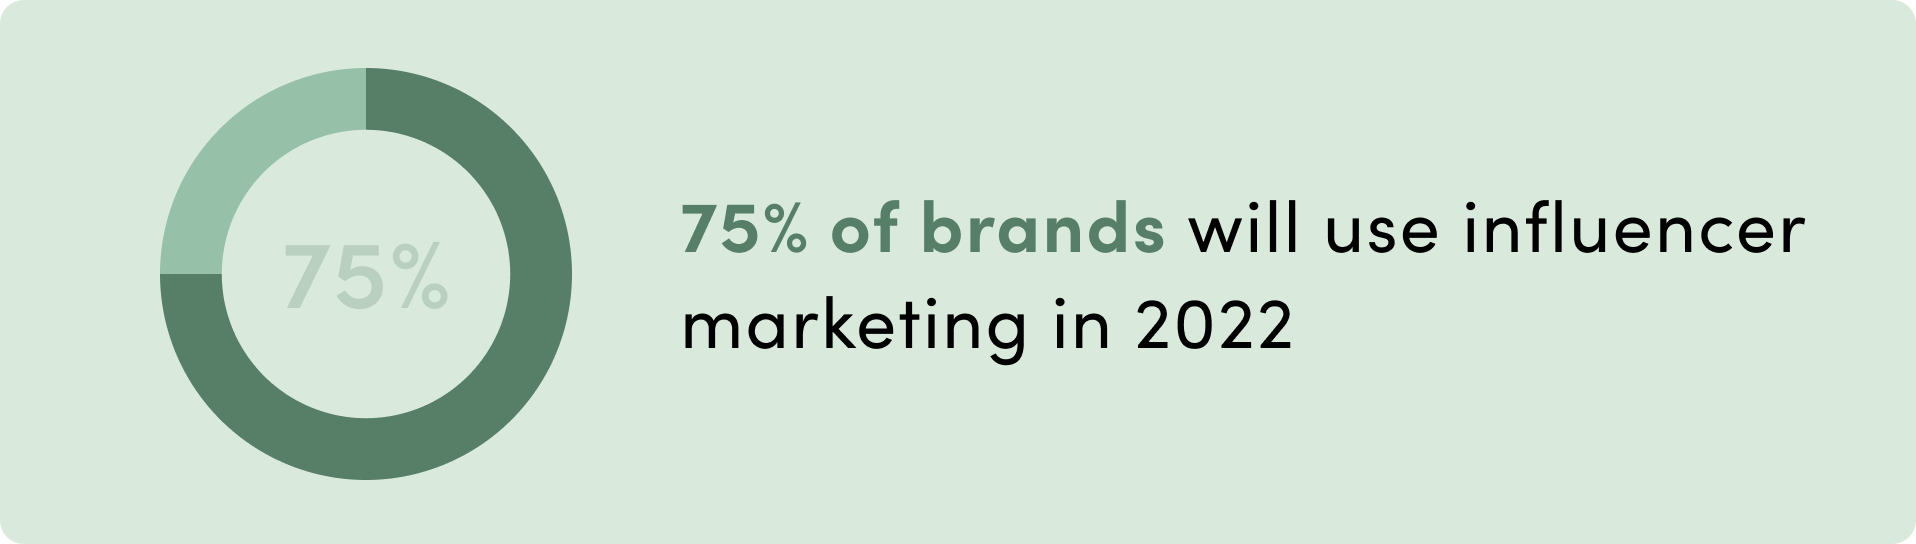 75% of brands will use influencer marketing in 2022.